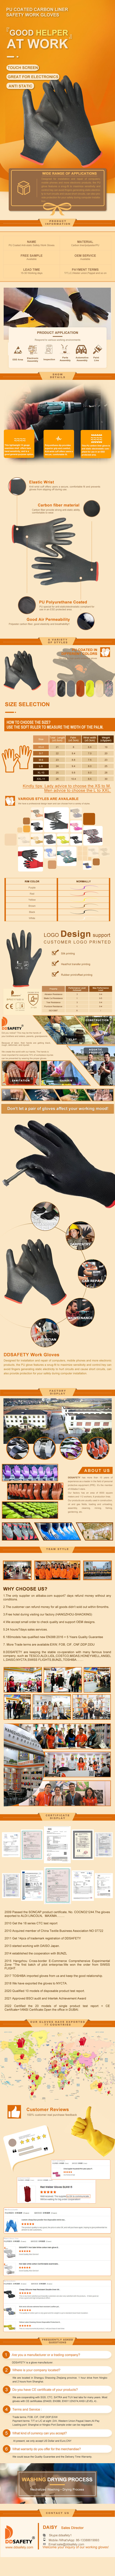 Carbon Fiber Touchscree Gloves with Polyurethane Coating, Safety Gloves for Light Duty Work -DPU217 Carbon Fiber Touchscree Gloves with Polyurethane Coating, Safety Gloves for Light Duty Work -DPU217 esd gloves,Anti-Static Gloves,Lightweight Grip Gloves,Carbon Fiber Touchscreen Gloves